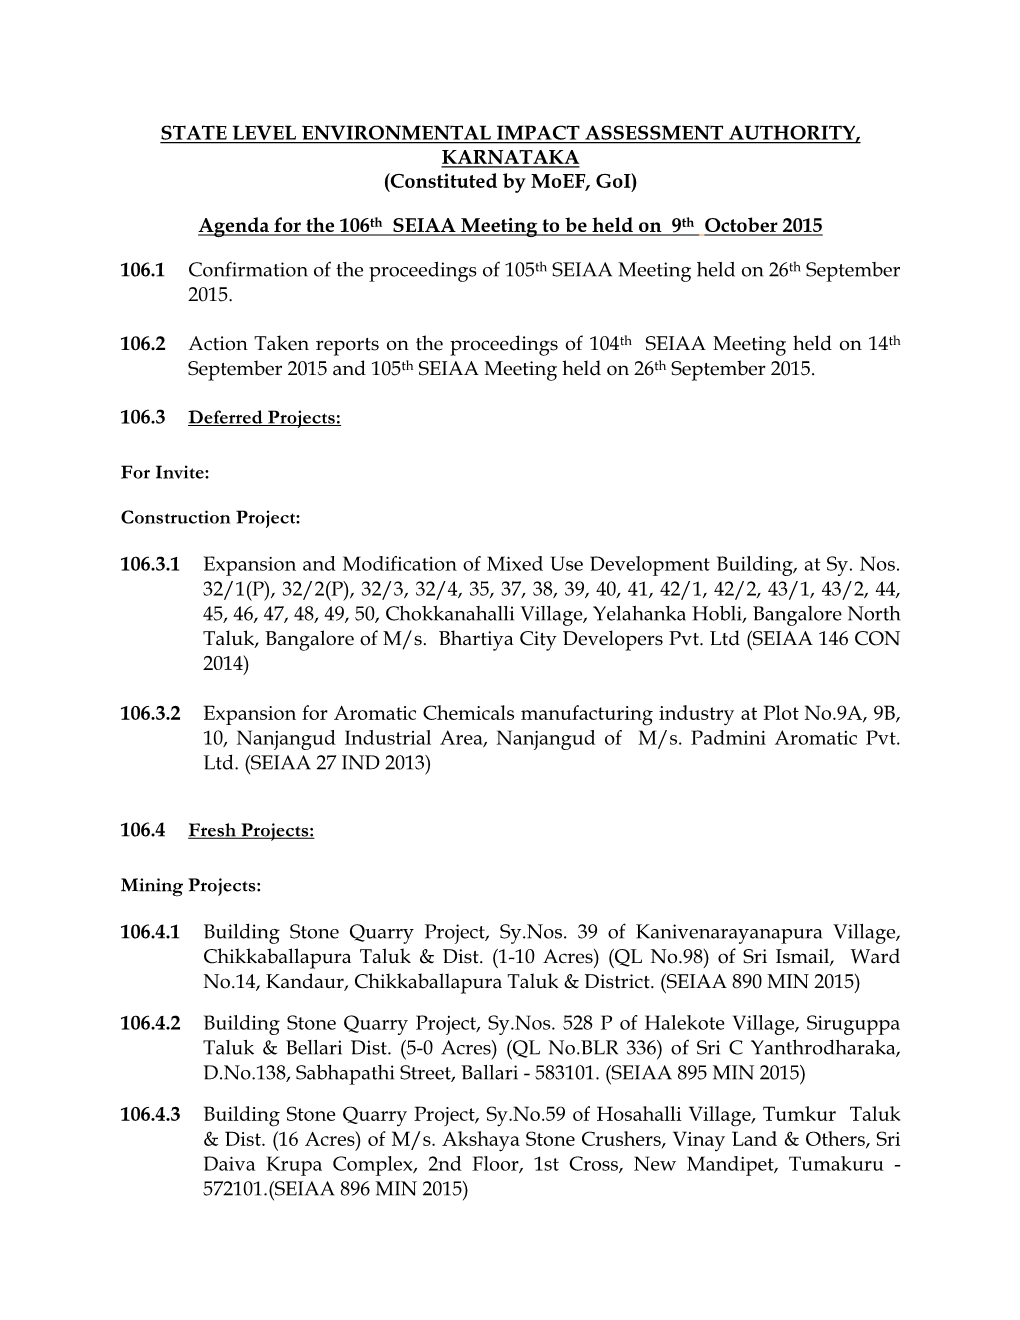 (Constituted by Moef, Goi) Agenda for the 106Th SEIAA Meeting T